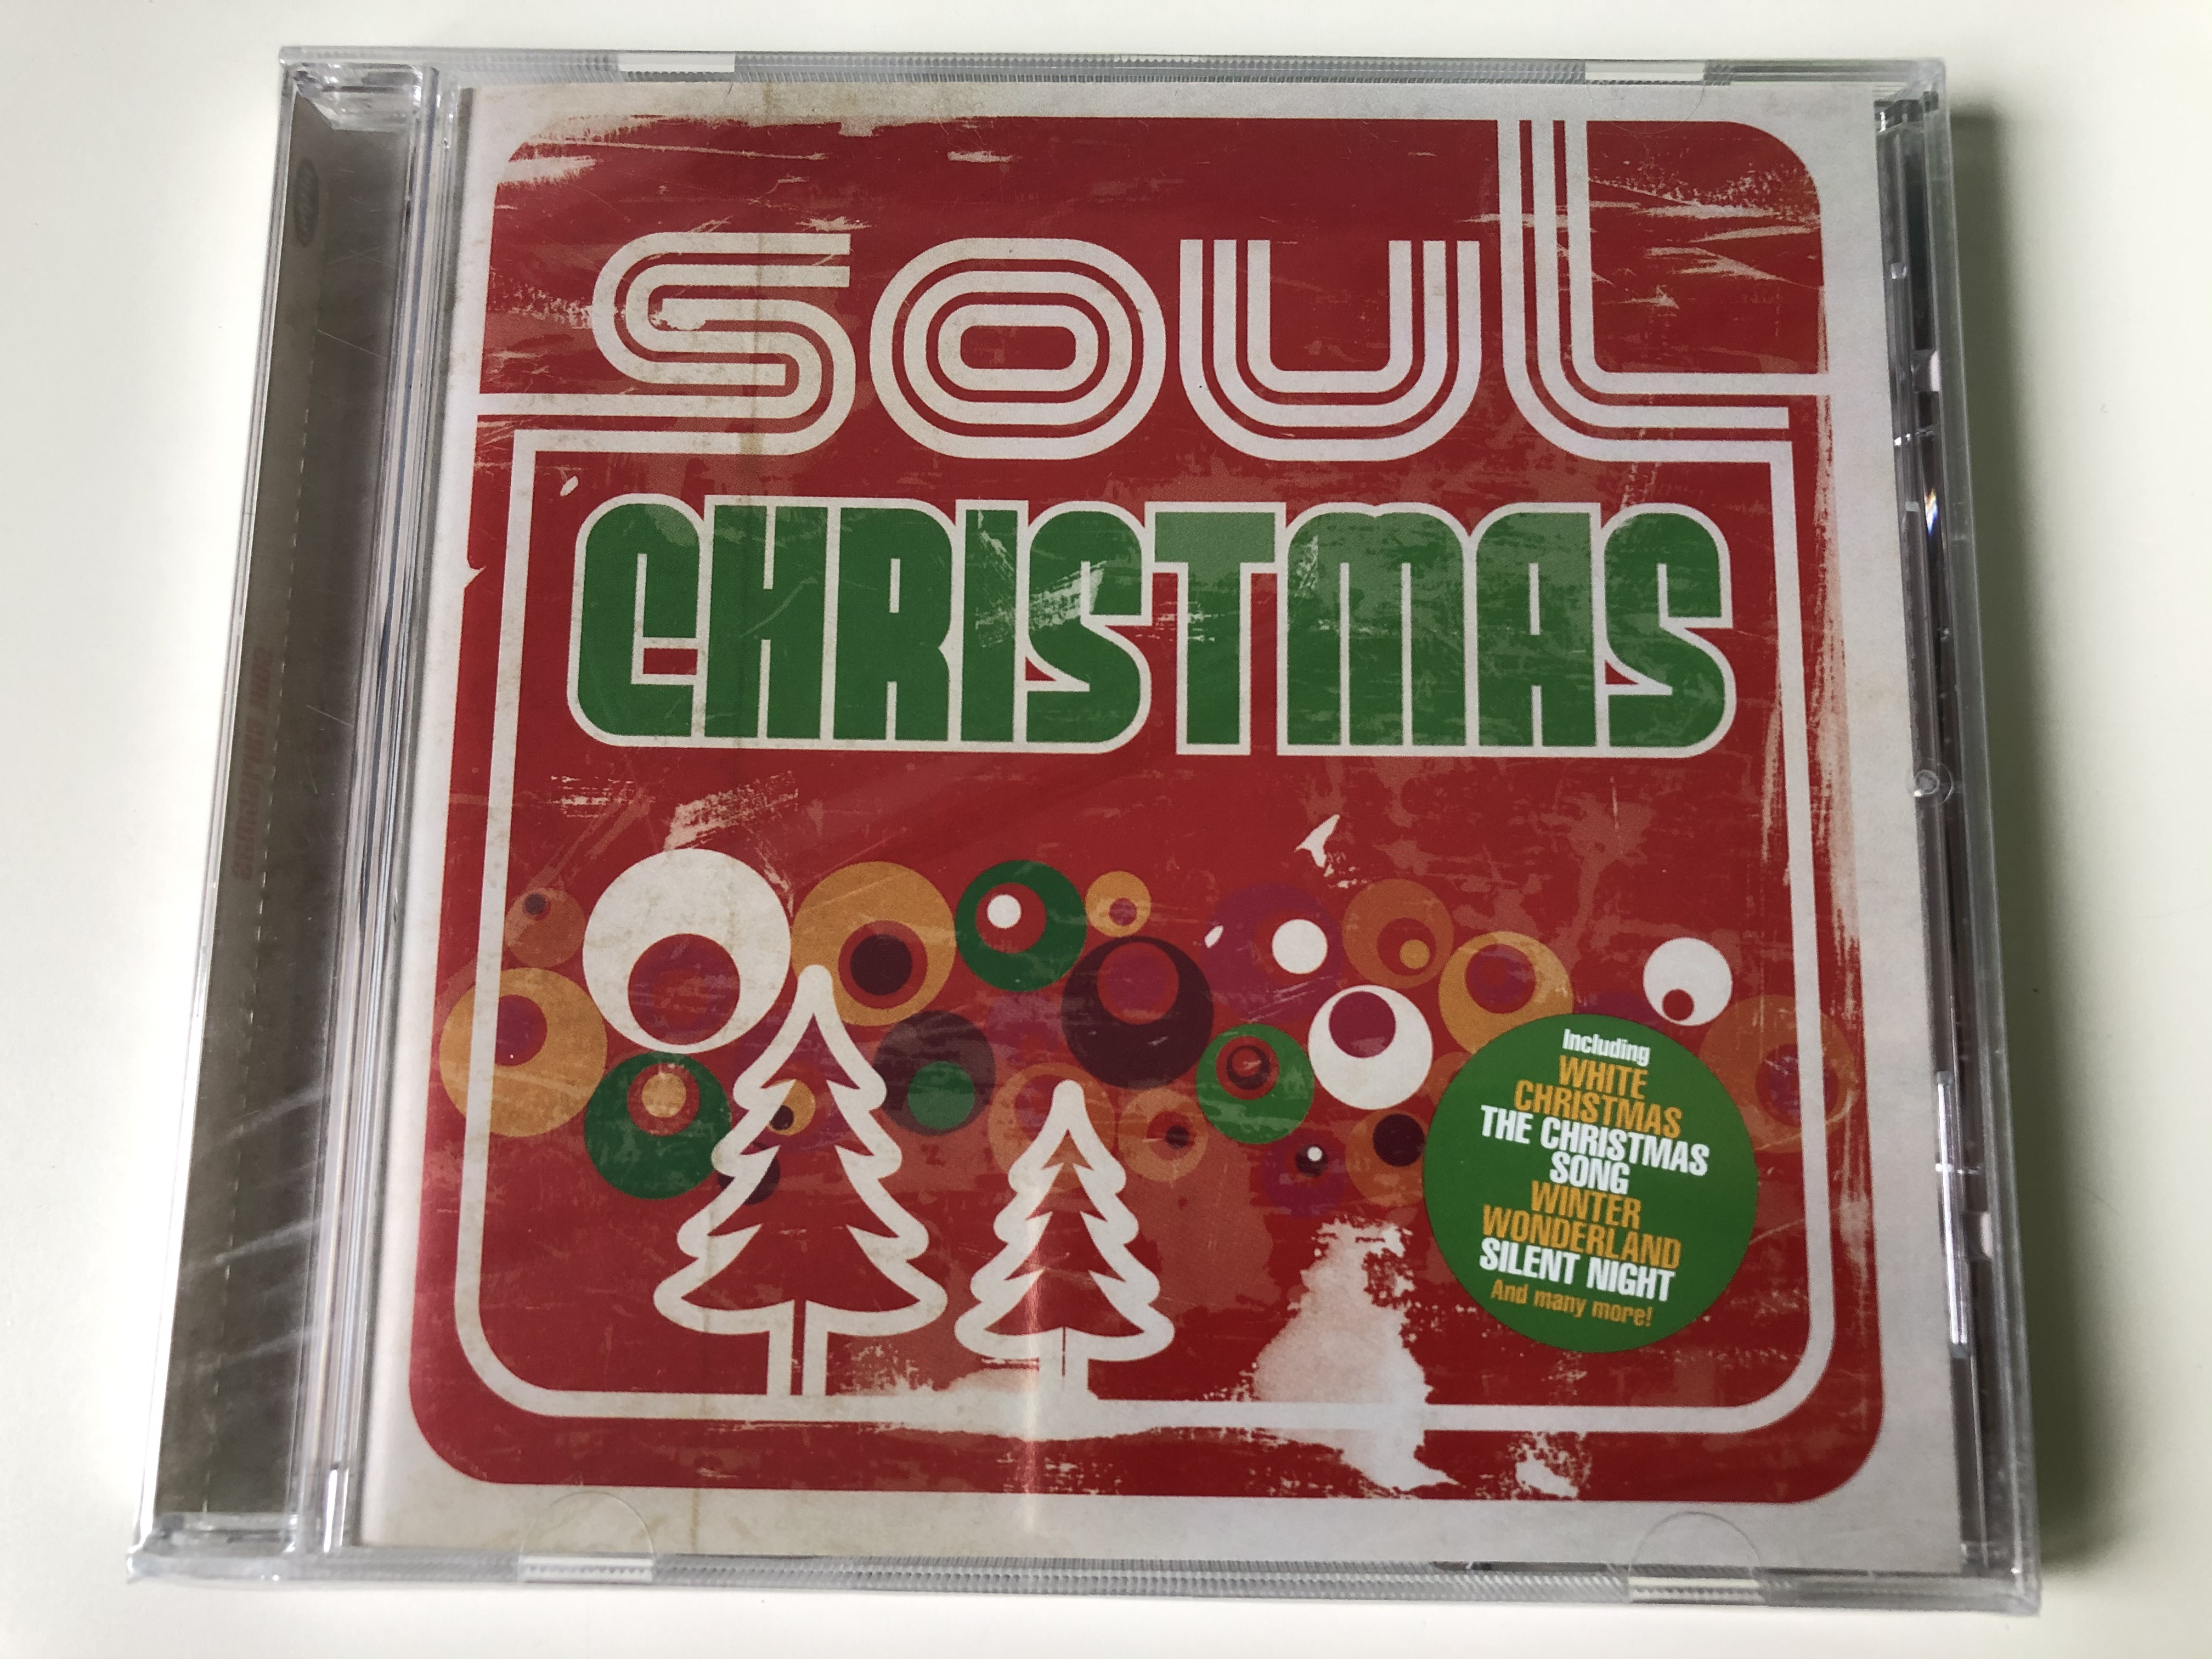 soul-christmas-including-white-christmas-the-christmas-song-winter-wonderland-silent-night-and-many-more-rhino-records-audio-cd-2014-825646213795-1-.jpg